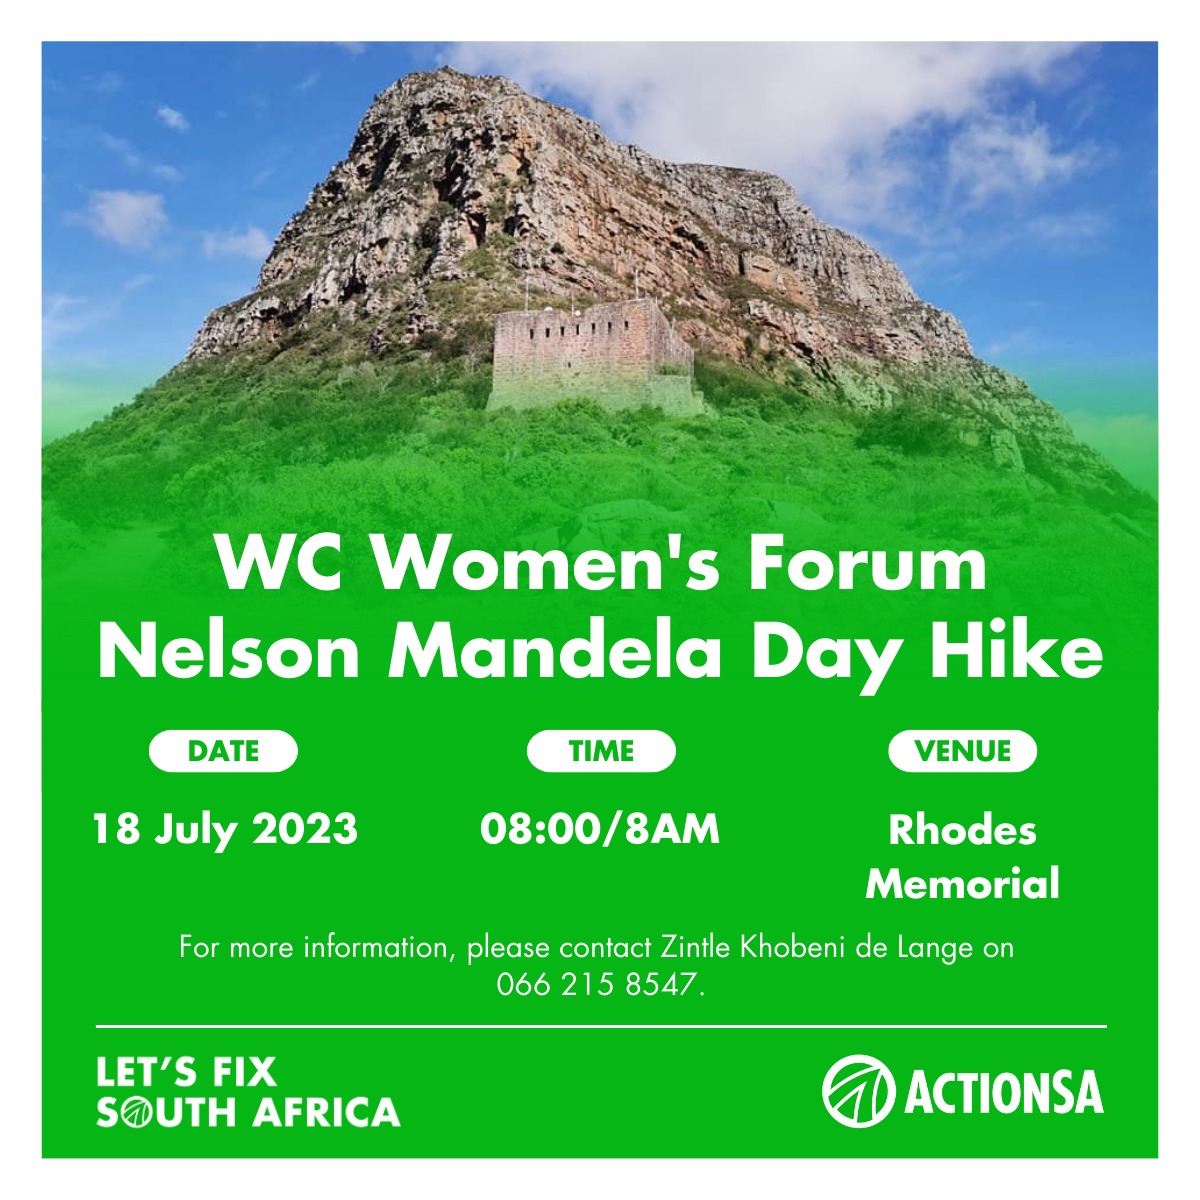 The WC Women's Forum is ready 2 remember the spirit of Madiba in a different way. As womxn we hv suffered enough under the uncaring Gov of the ANC. We will hike this trail to shine the spotlight on how much of an uphill battle our lives have been #MandelaDay #ActionSAProject2024